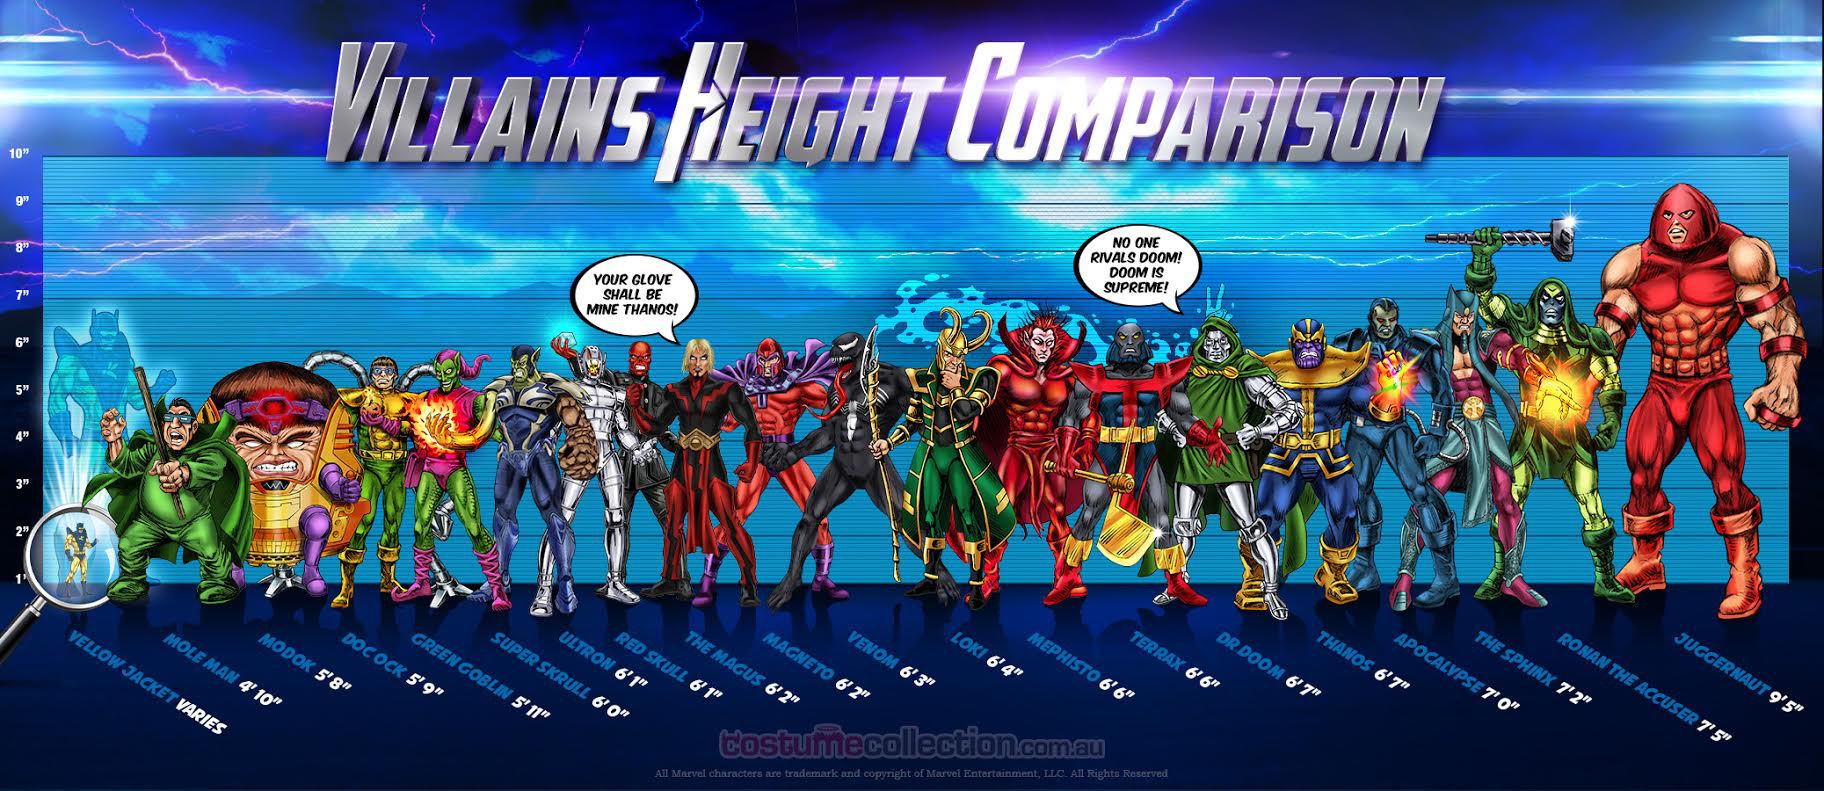 Who Are the 5 Tallest and Shortest Marvel Stars: Shortest MCU star